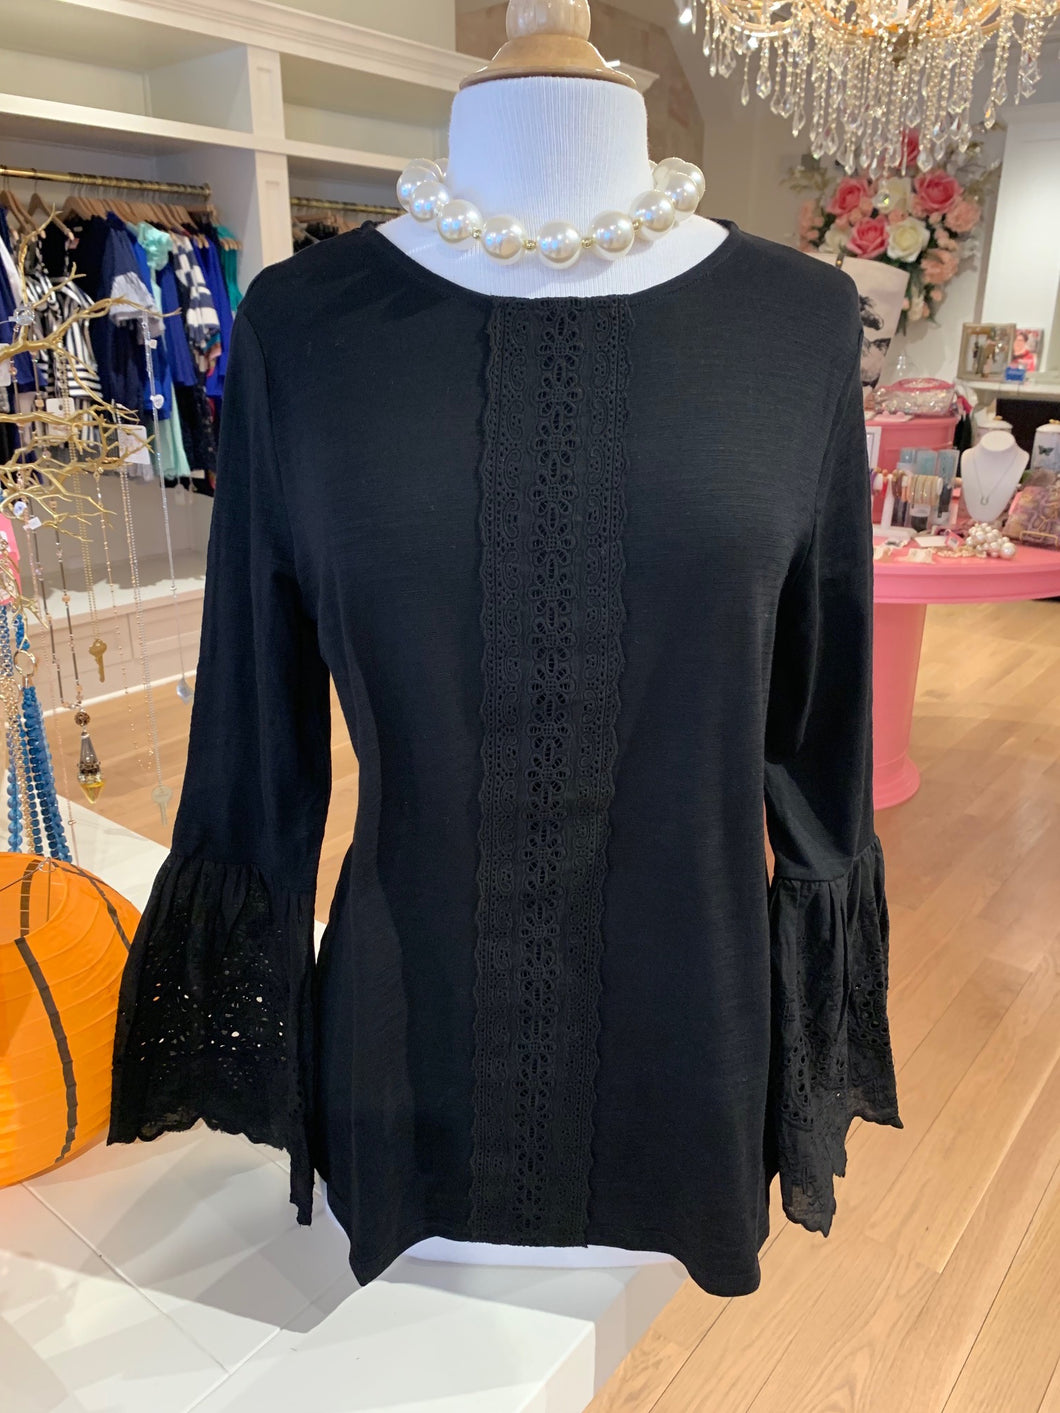 Black Long Sleeve Top w/Eyelet Lace Cuffs